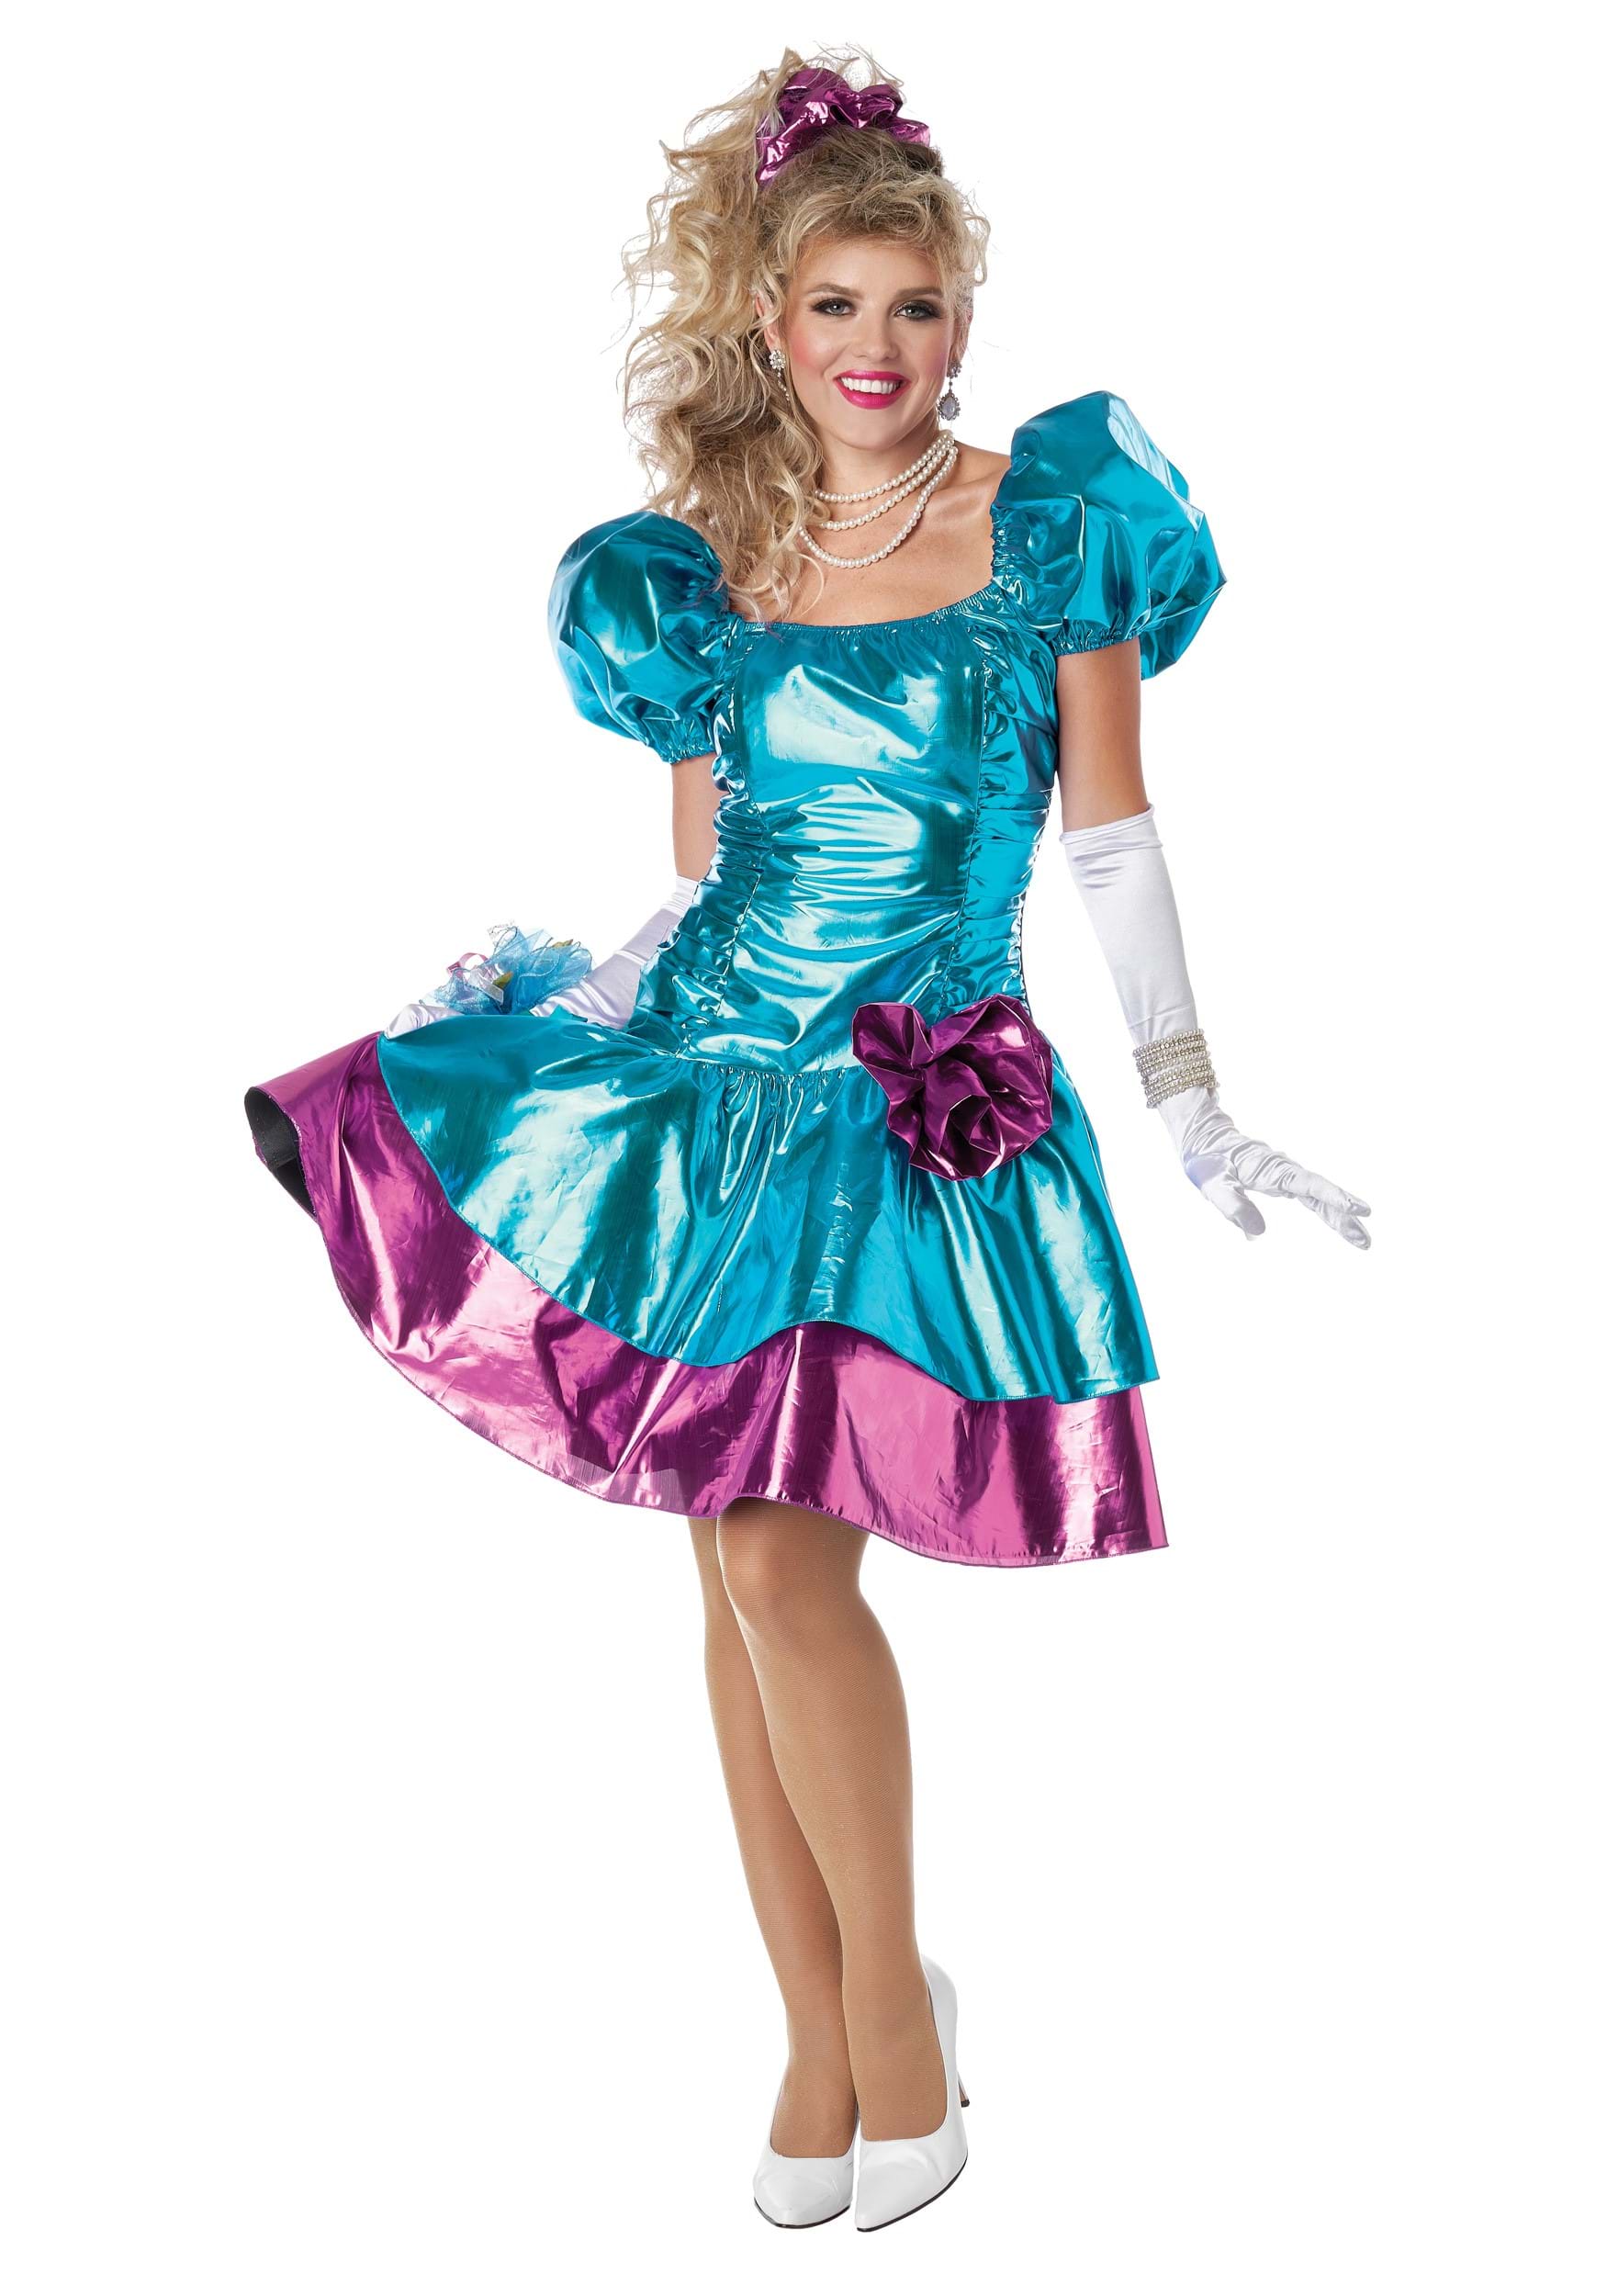 https://images.halloweencostumes.ca/products/81186/1-1/womens-80s-prom-dress-costume.jpg